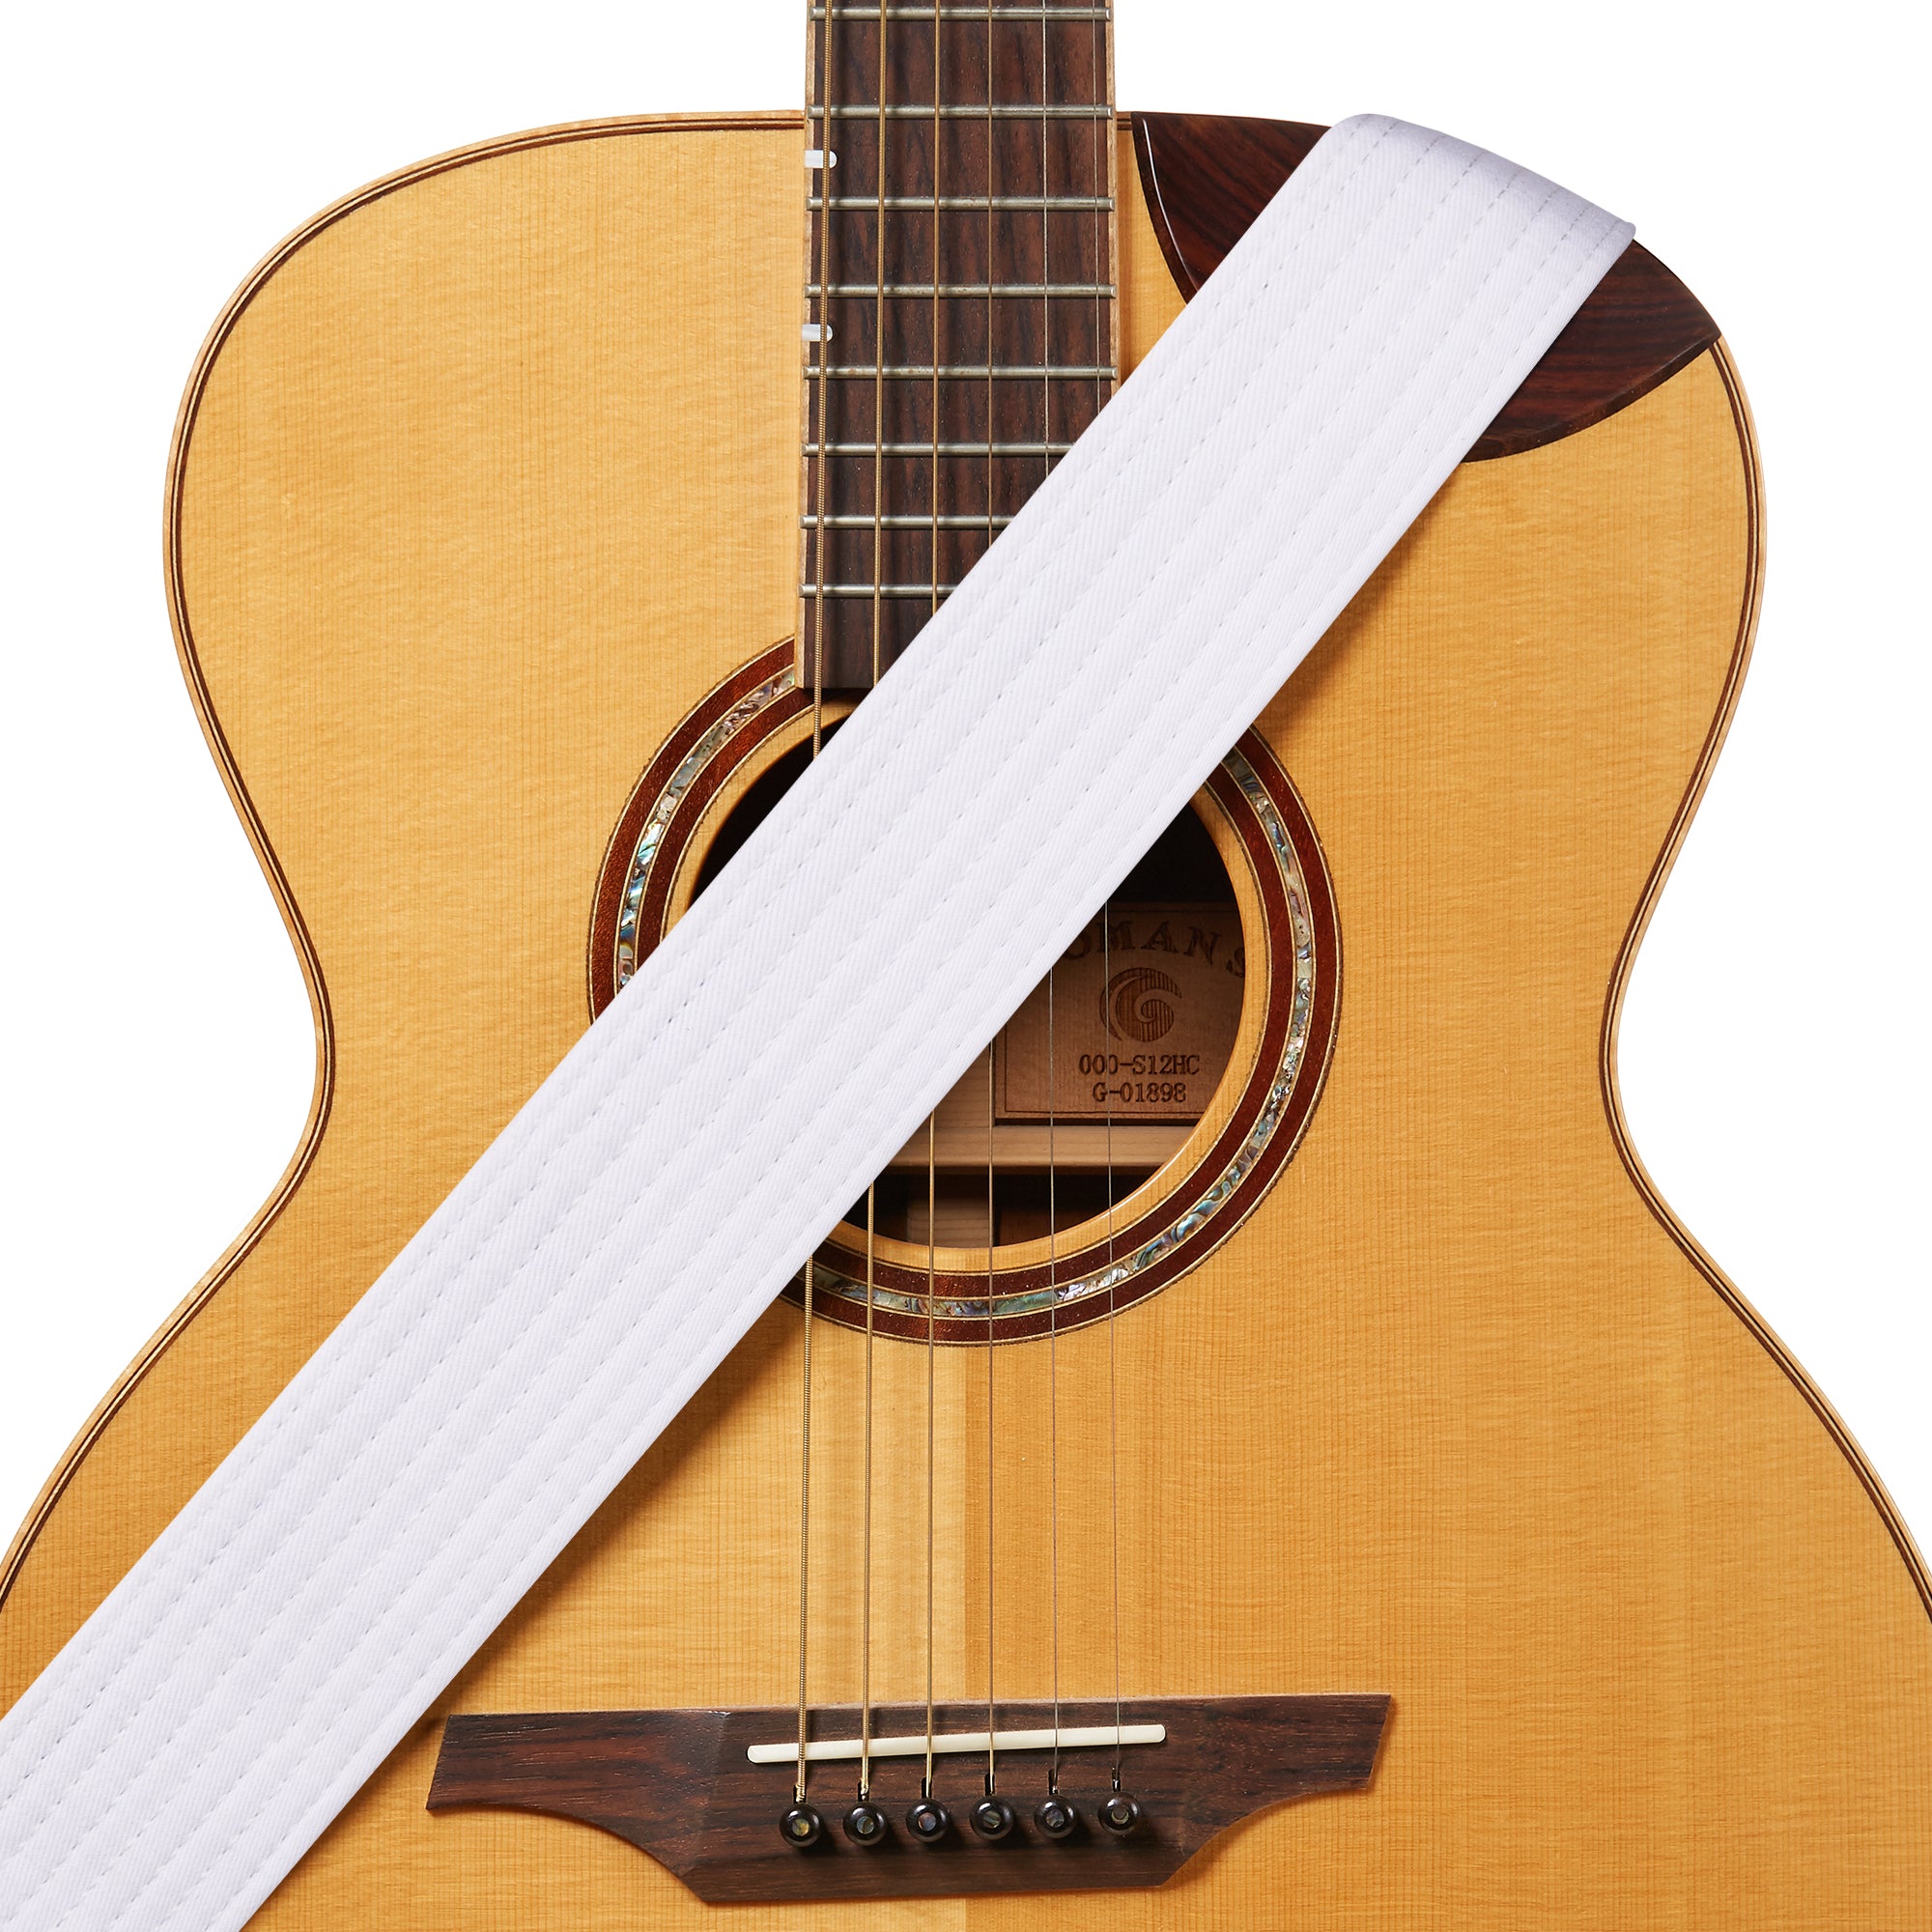 Acoustic guitar strap. Brown leather with cotton padding